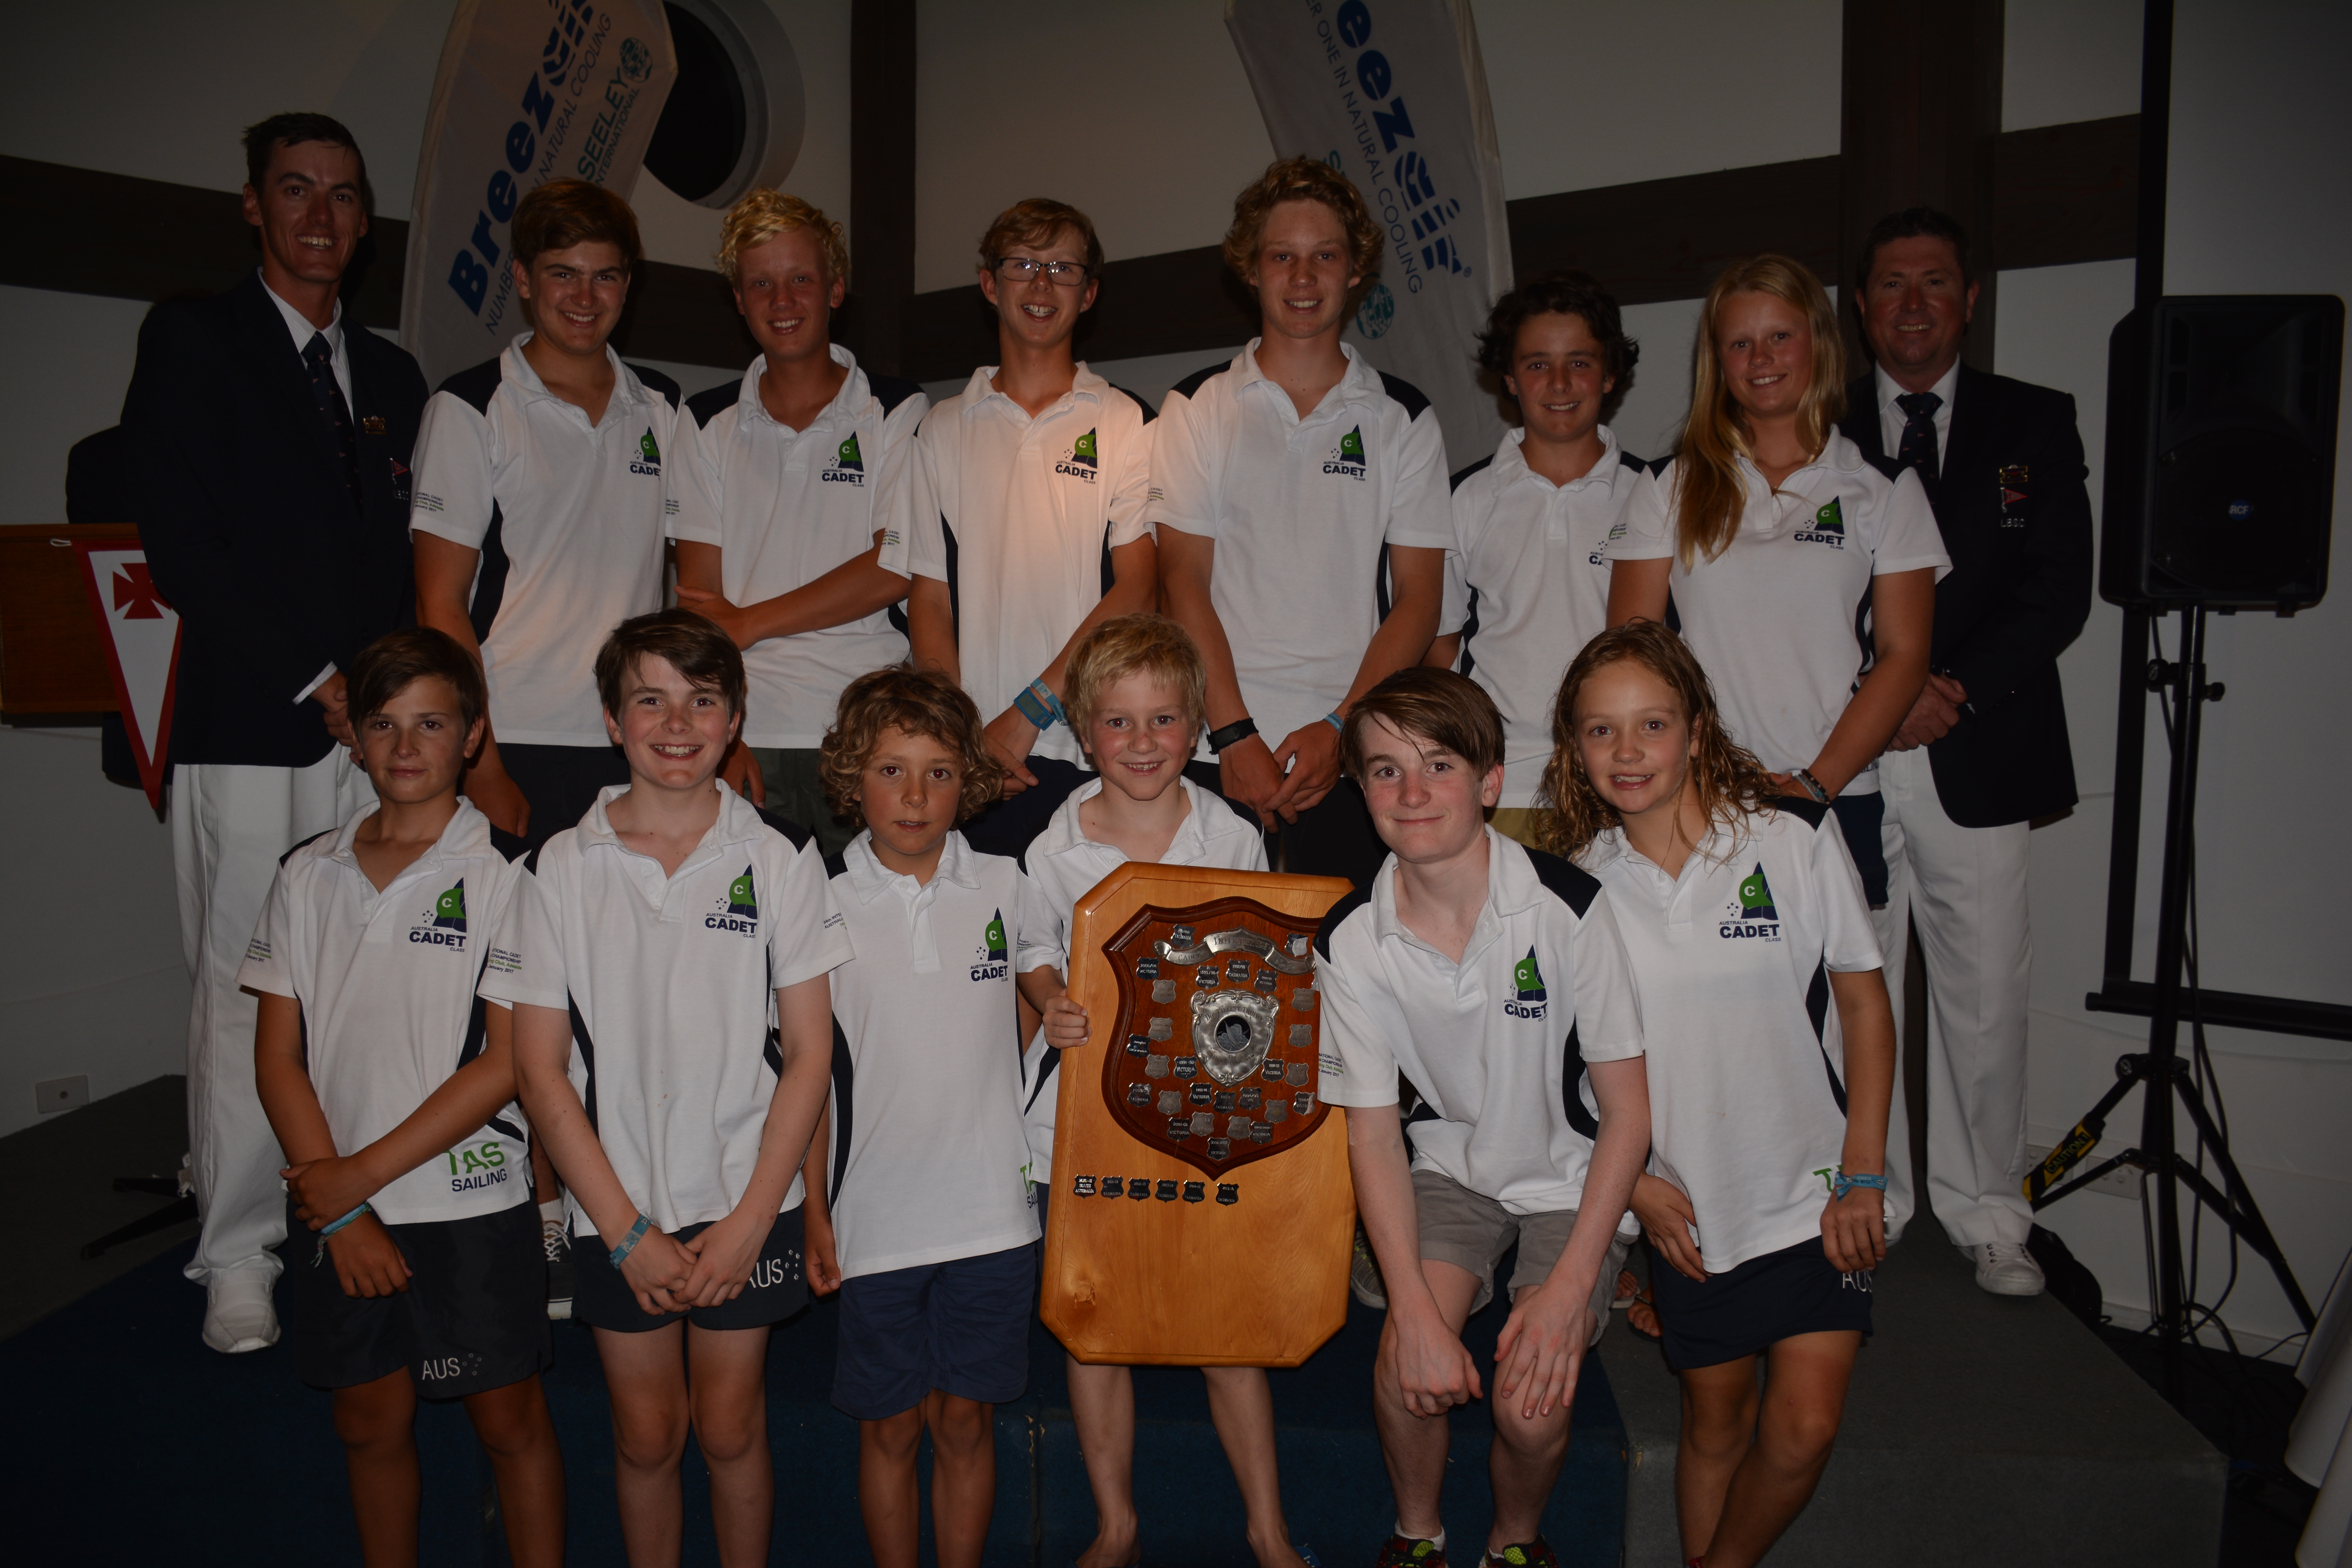 The Tasmanian team won the Tillett Team Trophy with all boats placing in the top five.